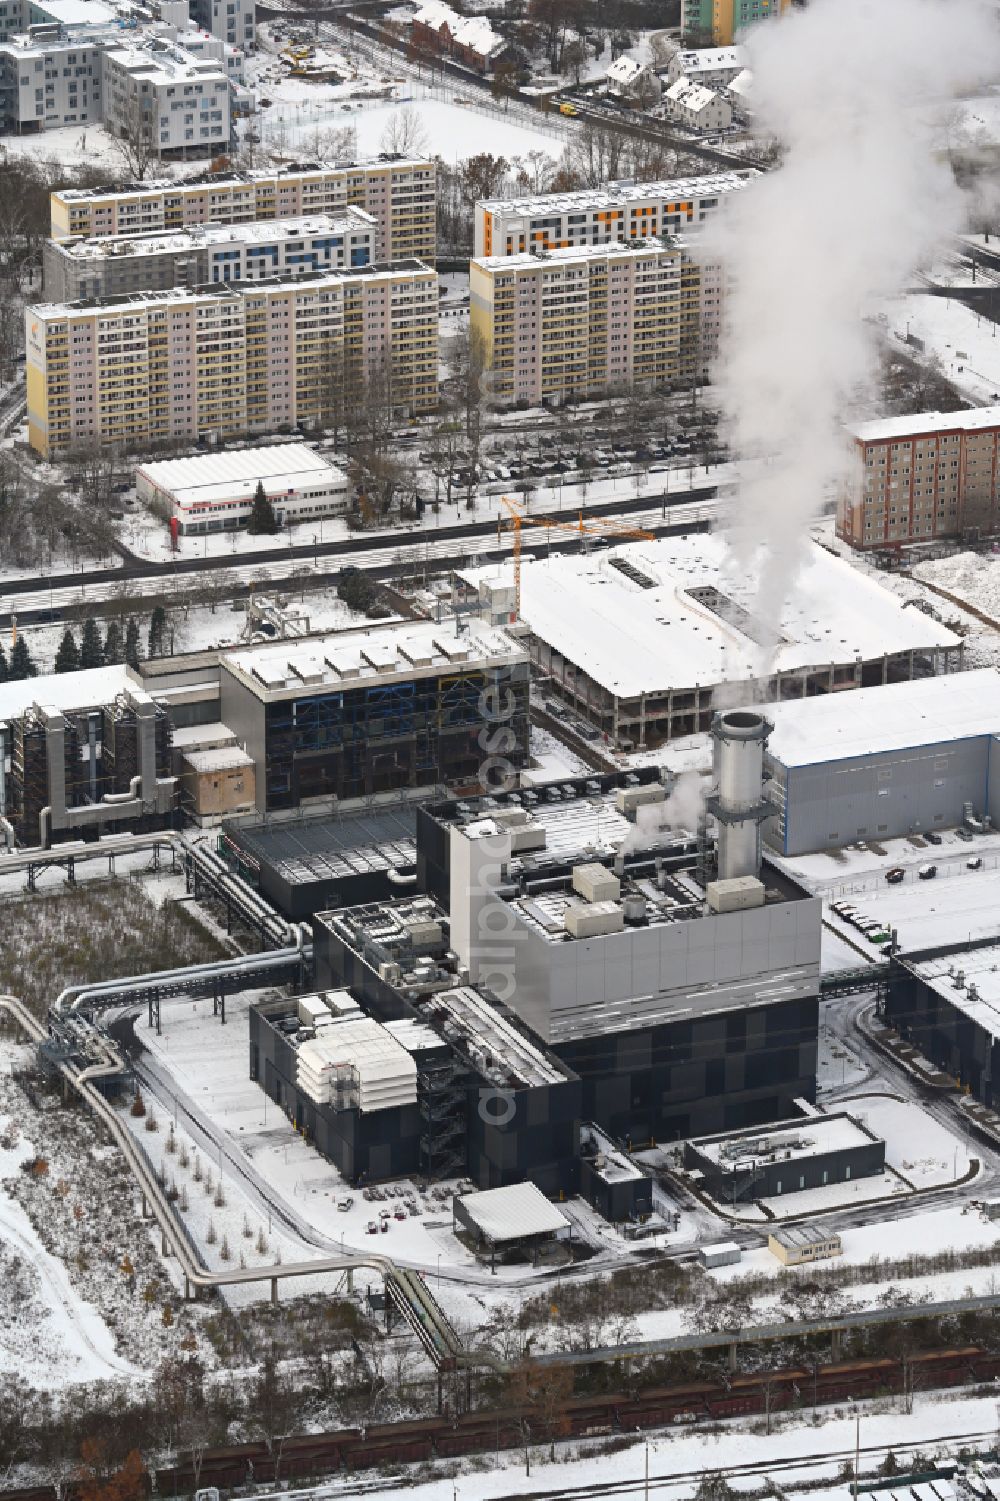 Berlin from the bird's eye view: Wintry snowy power plants and exhaust towers of thermal power station - Kraft-Waerme-Kopplungsanlage on Rhinstrasse in the district Marzahn in Berlin, Germany